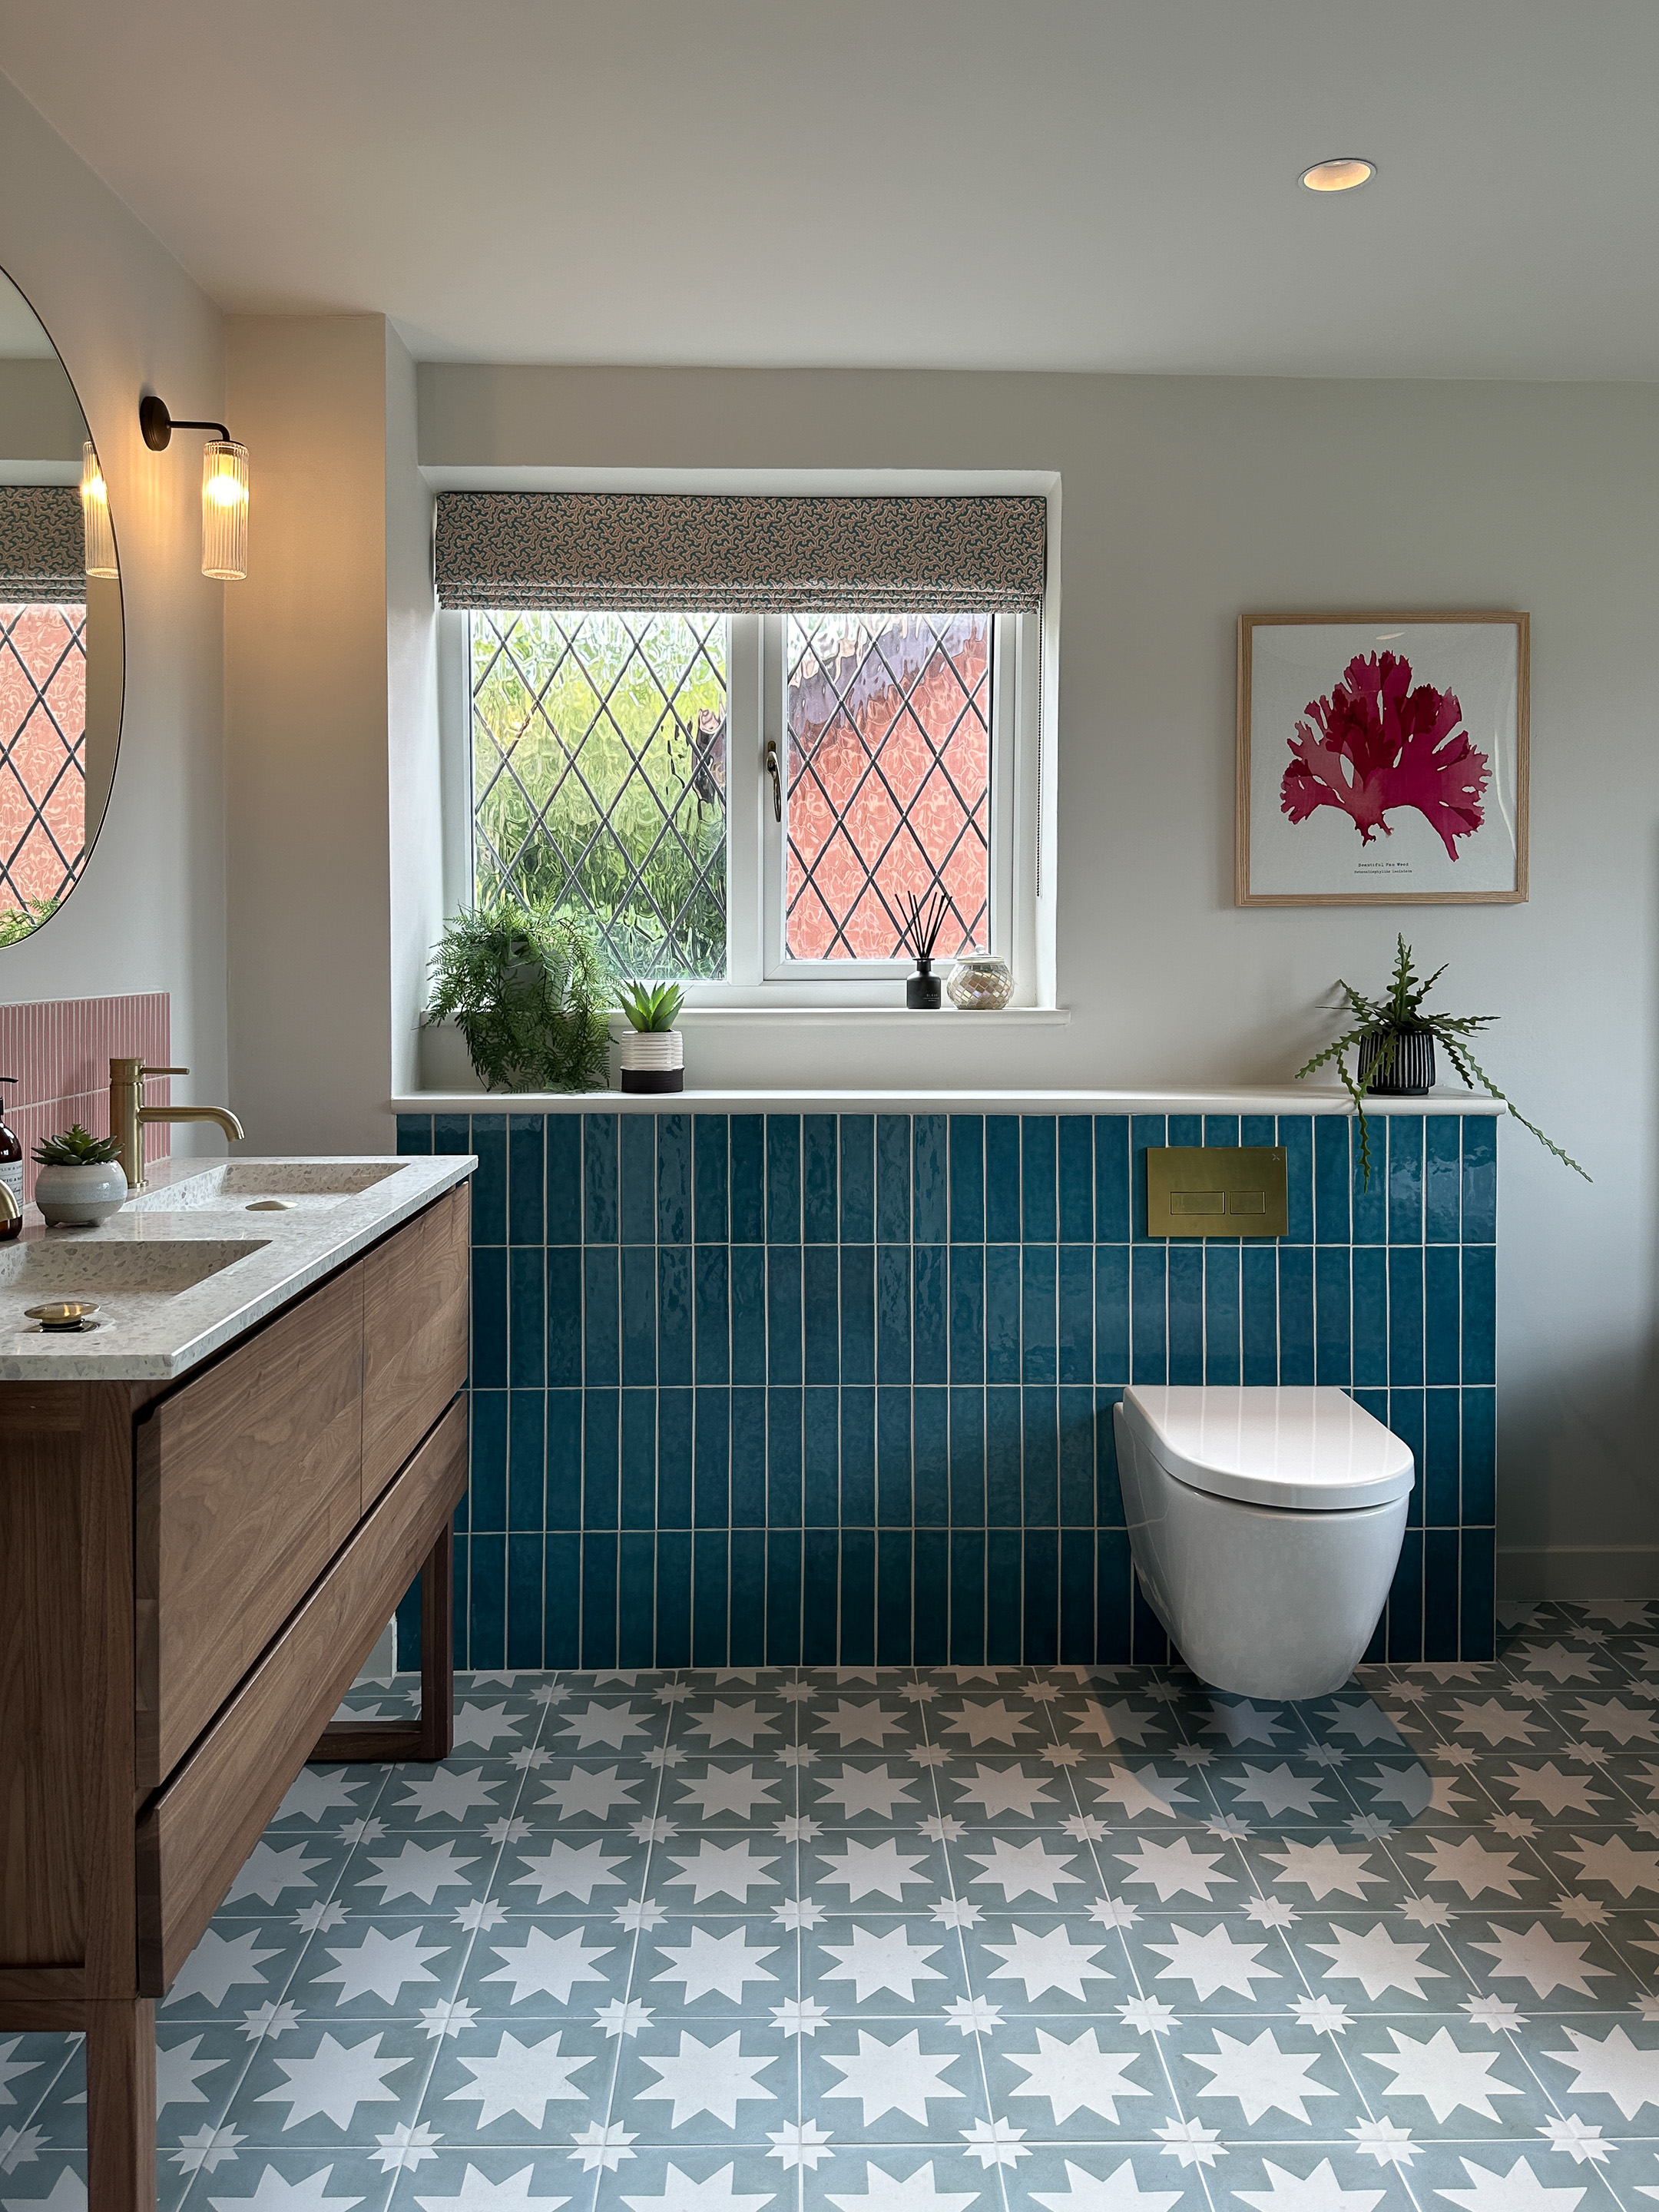 This picture shows a bathroom with a new floating loo against blue tiles. The floor tiles have a bold star pattern, and the vanity unit is walnut with a terrazzo top.